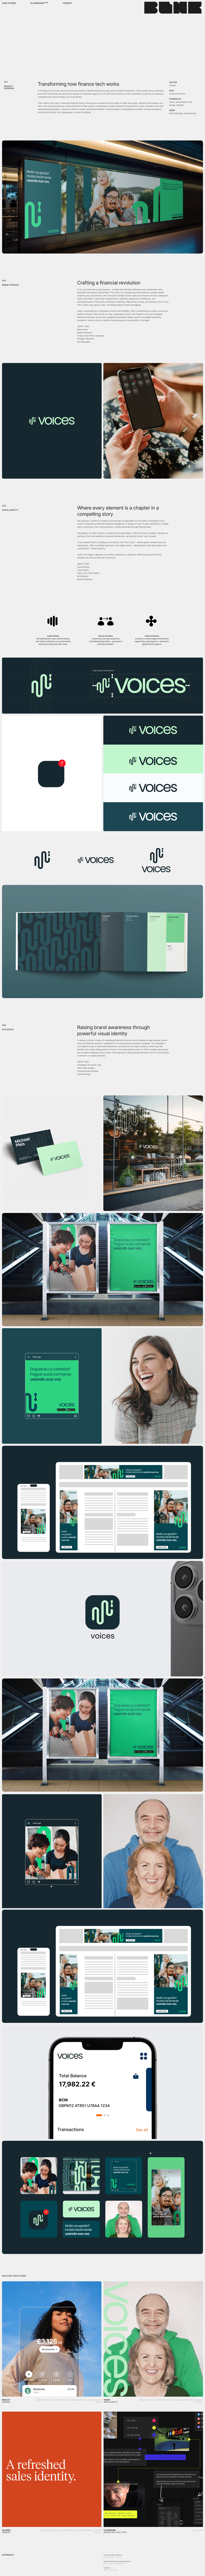 ‍BLNK Landing Page Example: ‍BLNK is the creative world from Blanca Villalobos, a strategic branding designer leading the world’s most visionary companies to brand big ideas and leap to what’s next.